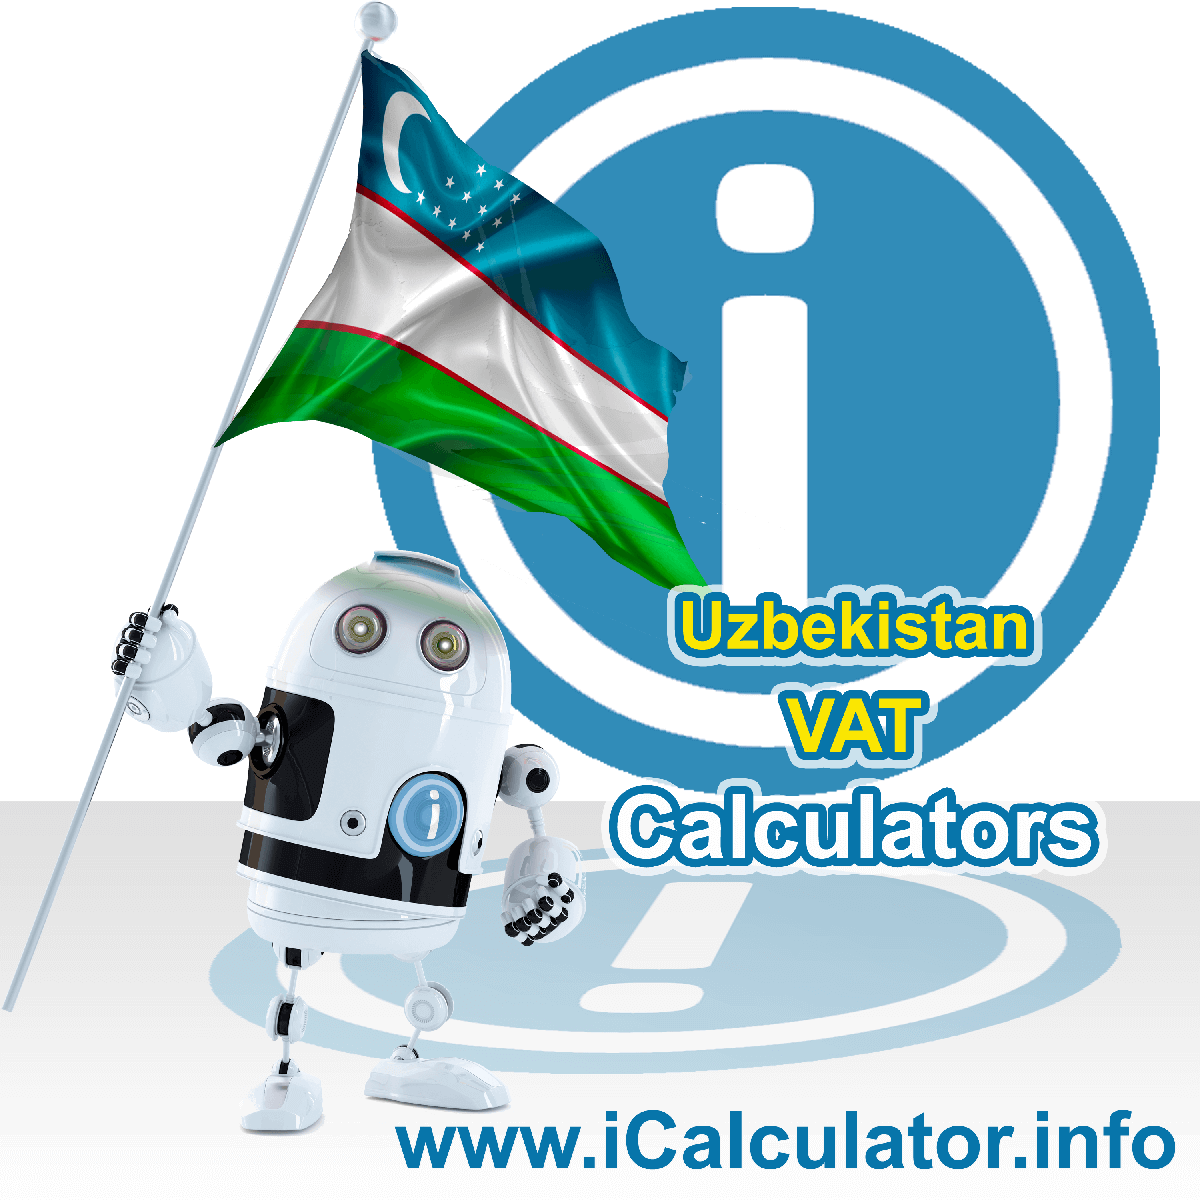 Uzbekistan VAT Calculator. This image shows the Uzbekistan flag and information relating to the VAT formula used for calculating Value Added Tax in Uzbekistan using the Uzbekistan VAT Calculator in 2023